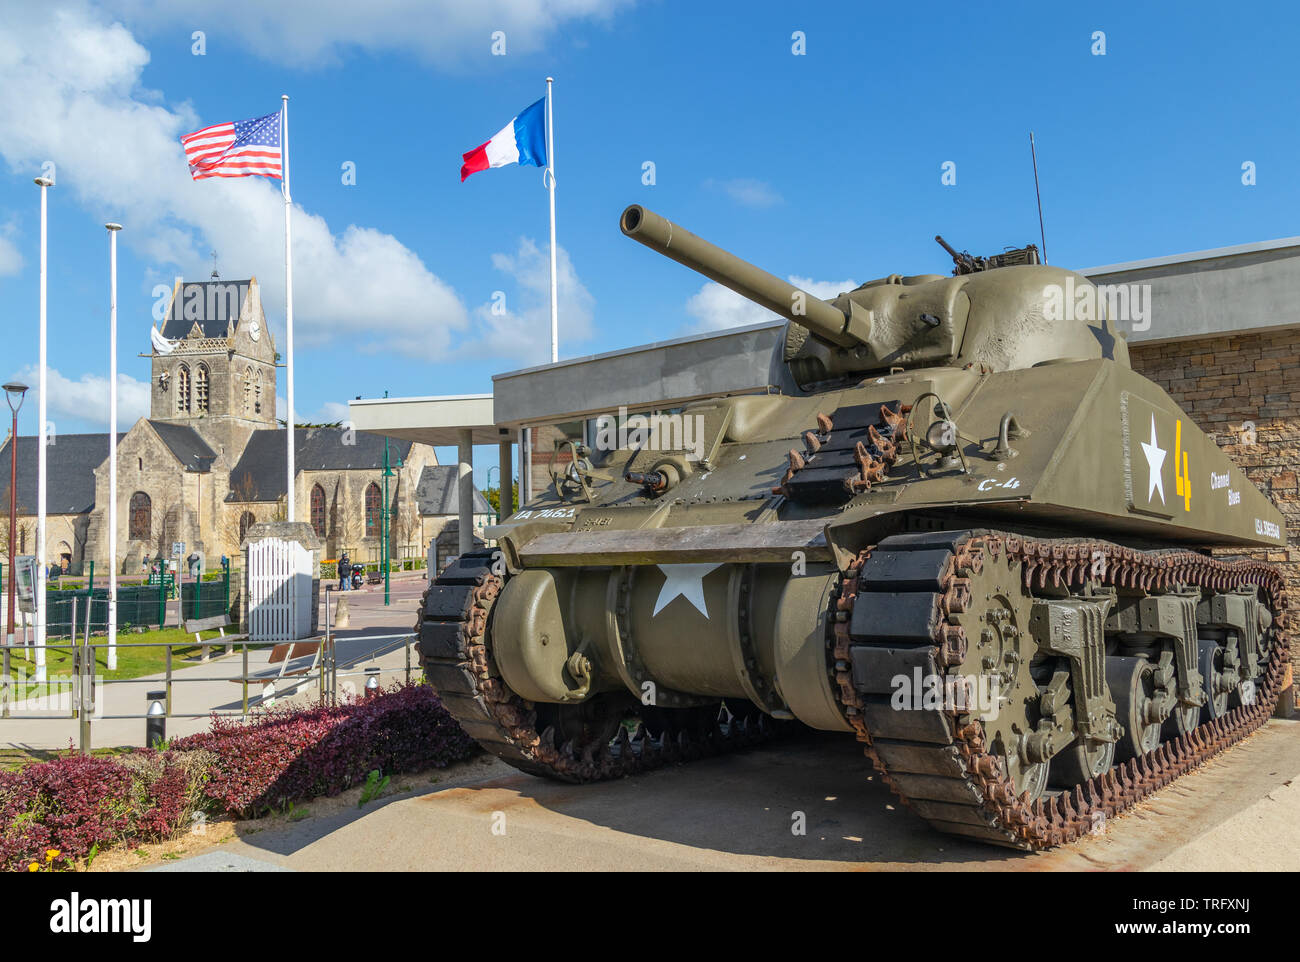 M4 sherman tank hi-res stock photography and images - Alamy